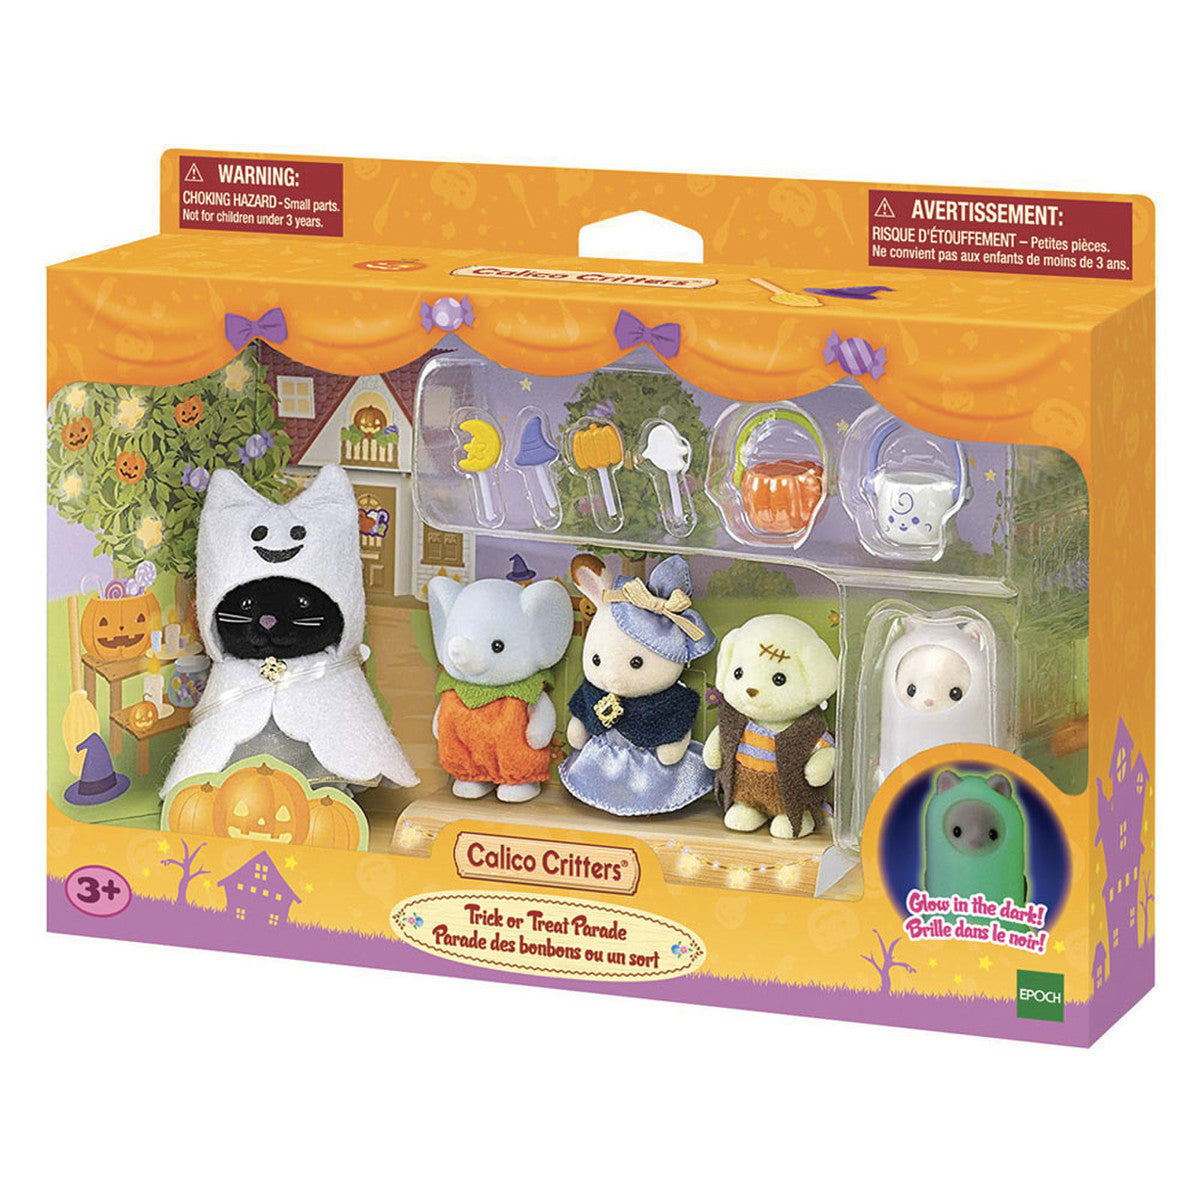 Trick or Treat Parade by Calico Critters #CC2027